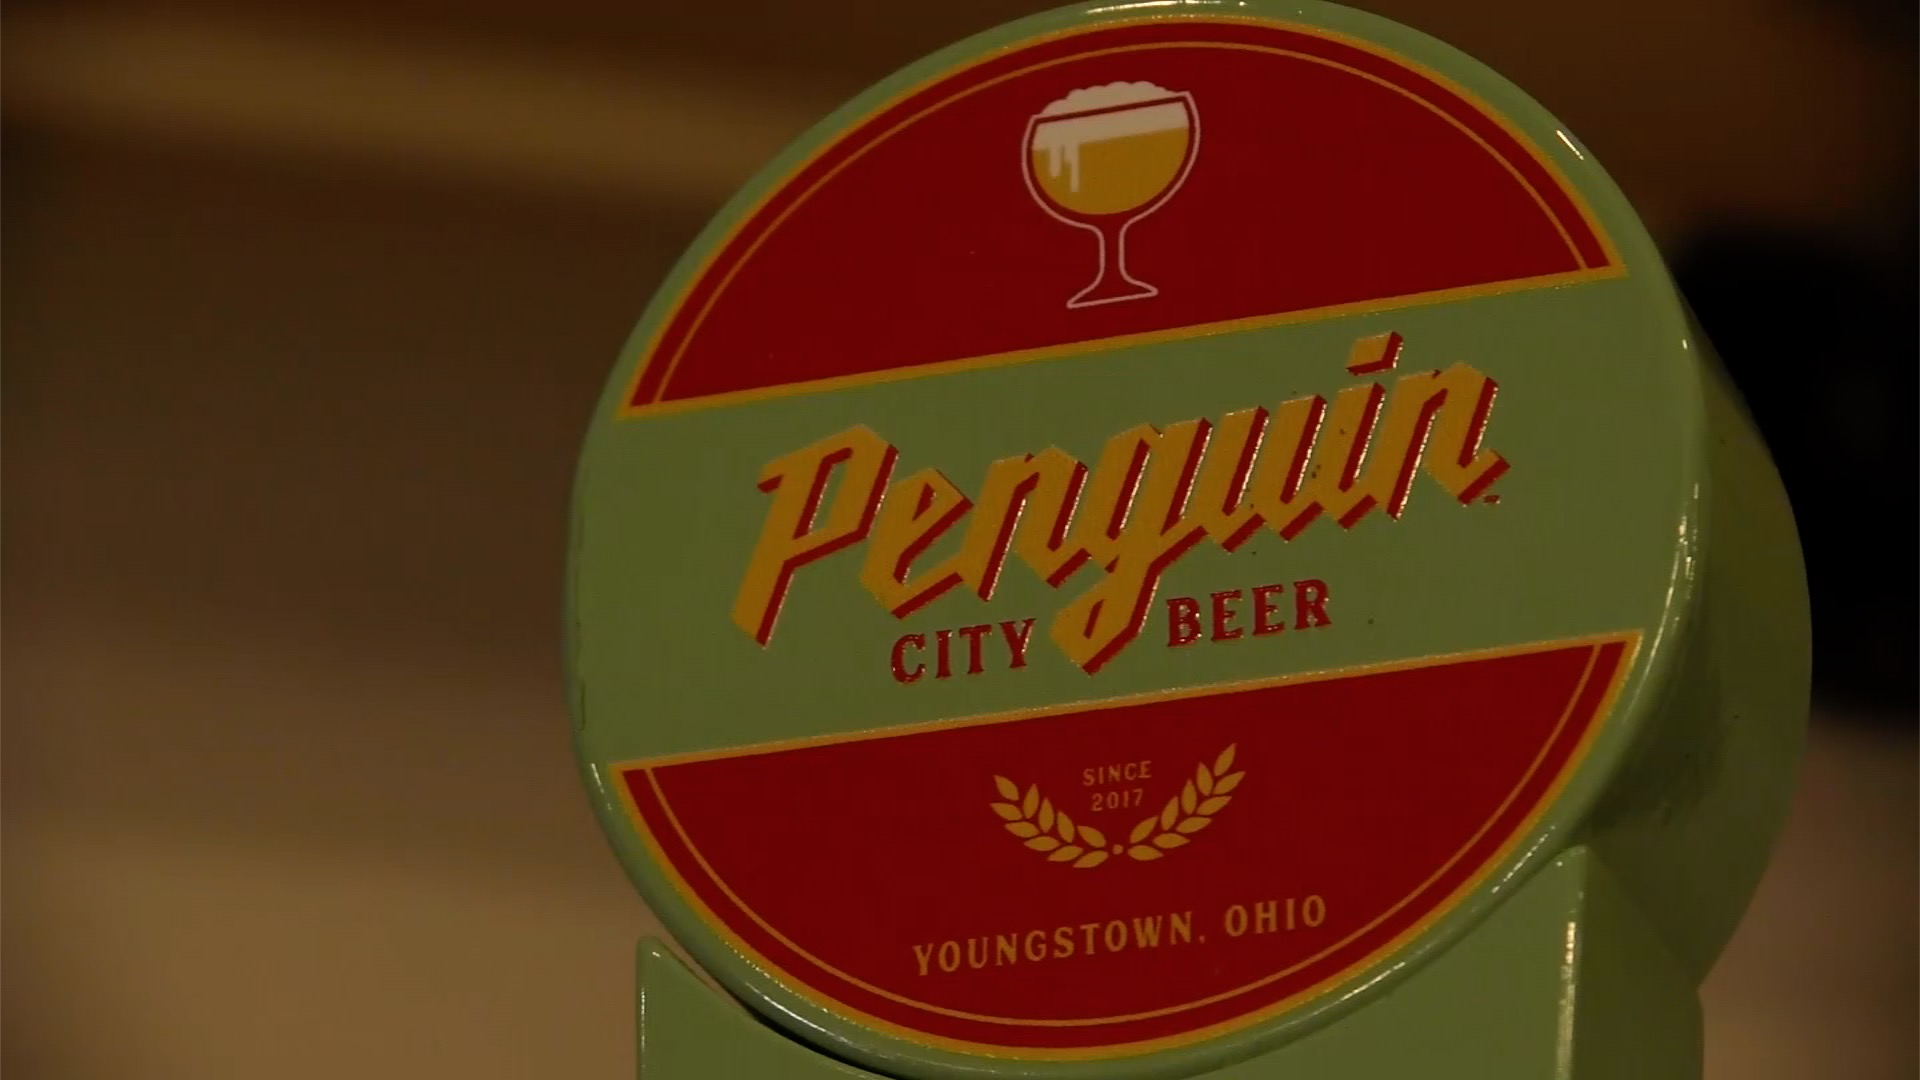 A Beer for Youngstown